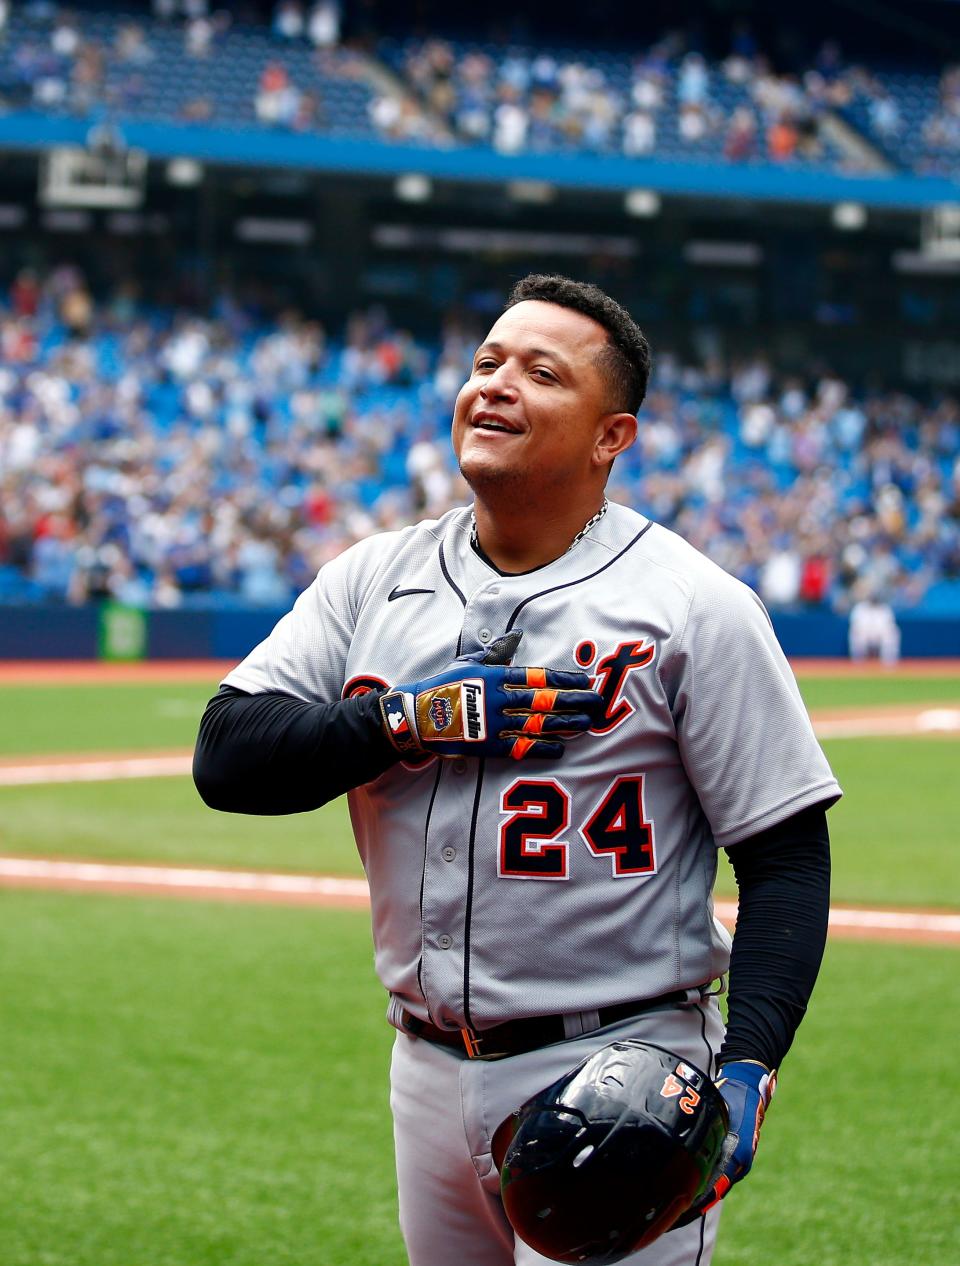 Detroit Tigers hitter Miguel Cabrera celebrates with fans on a curtain call after hitting his 500th career home run in the sixth inning against the Toronto Blue Jays at Rogers Centre on Aug. 22, 2021 in Toronto.